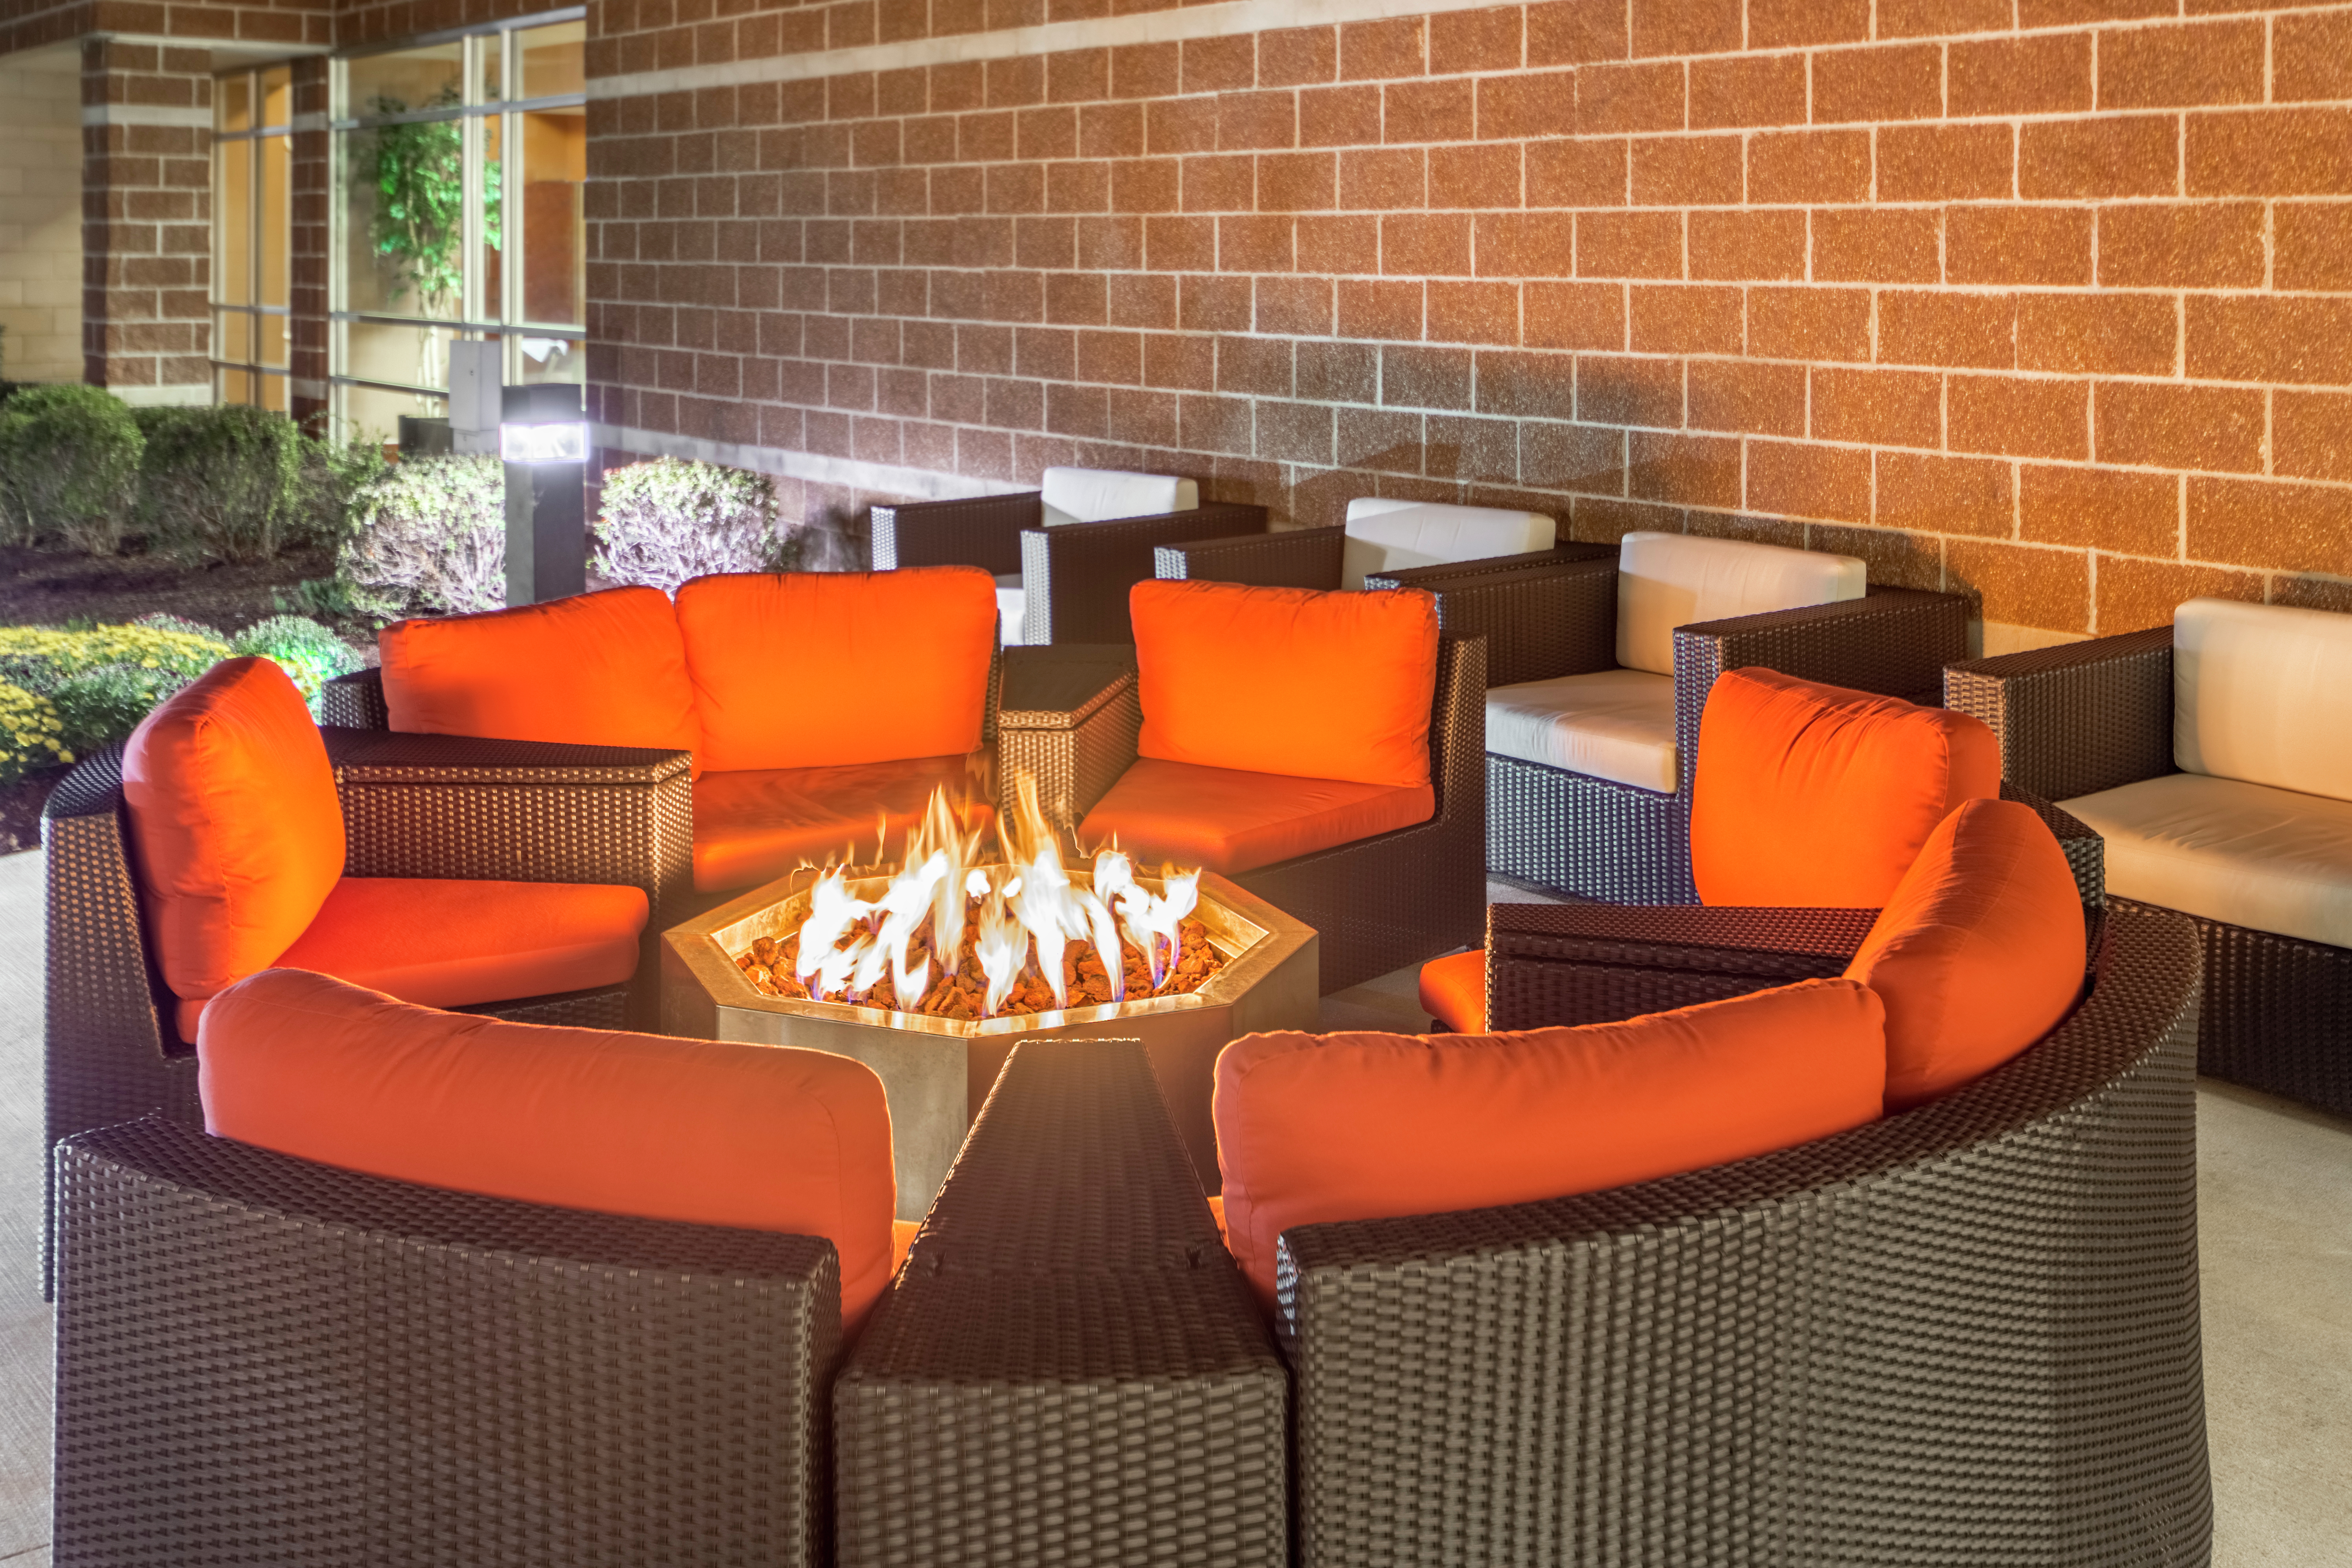 Outdoor Patio Firepit and Seating